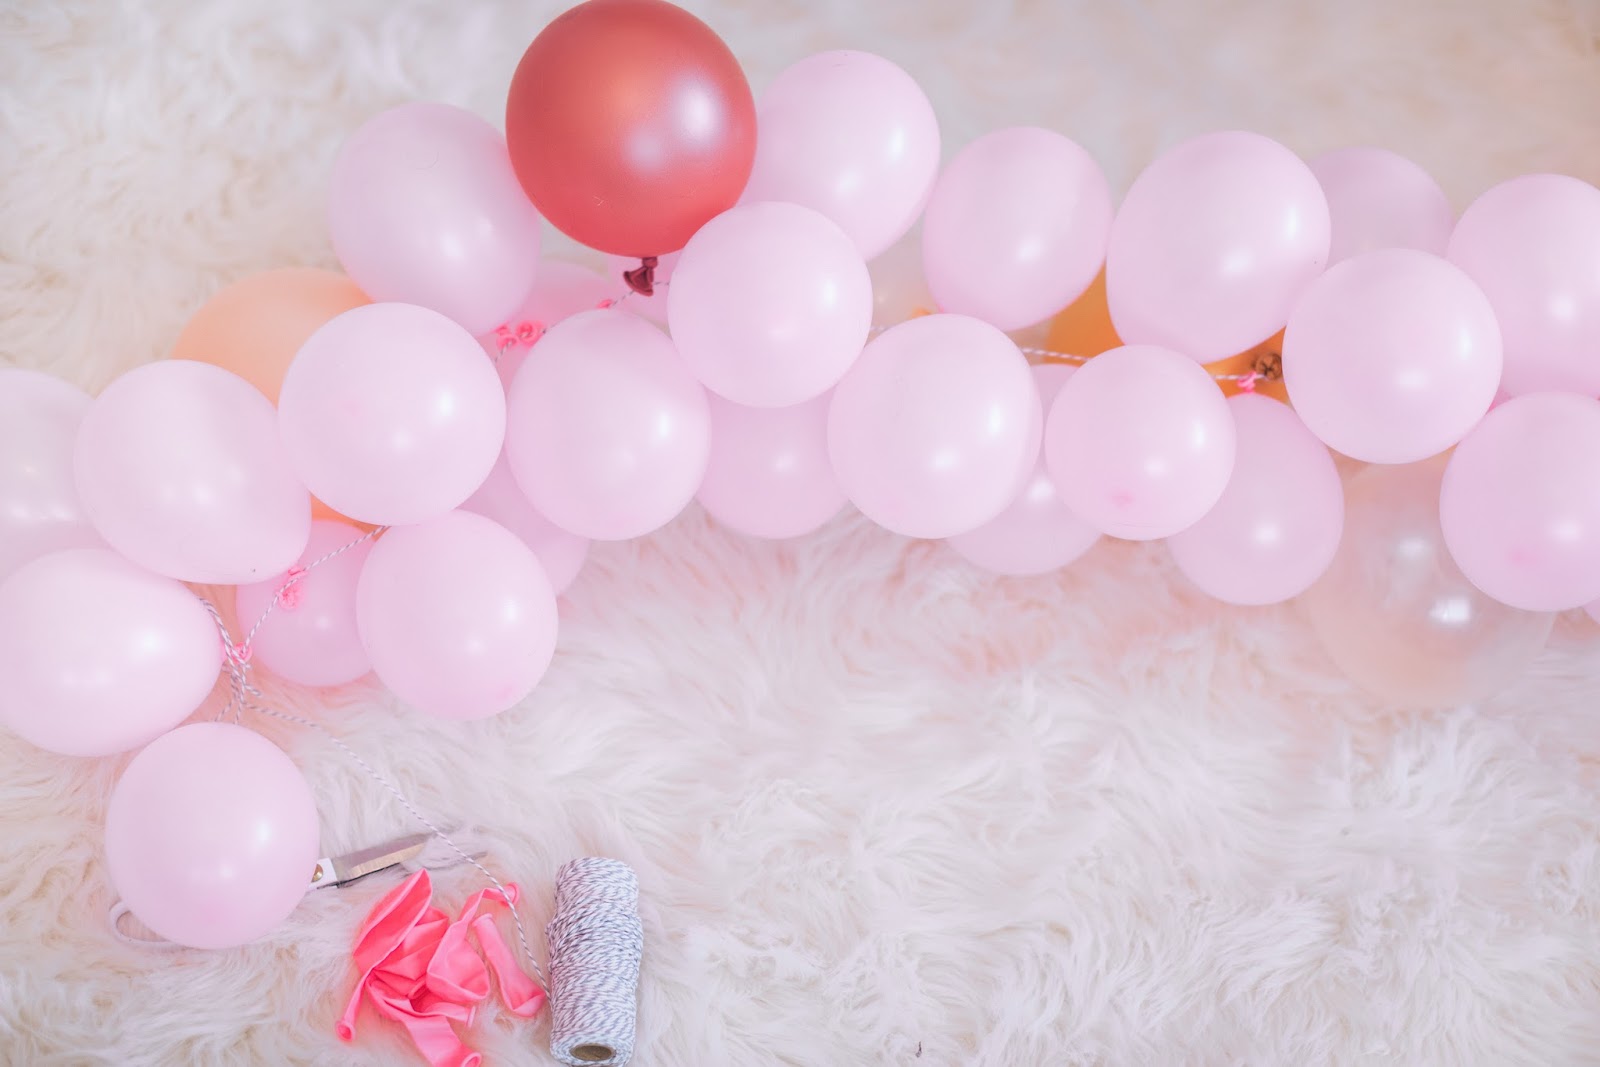 How to Create a DIY Balloon Garland  by popular party planning blogger The Celebration Stylist